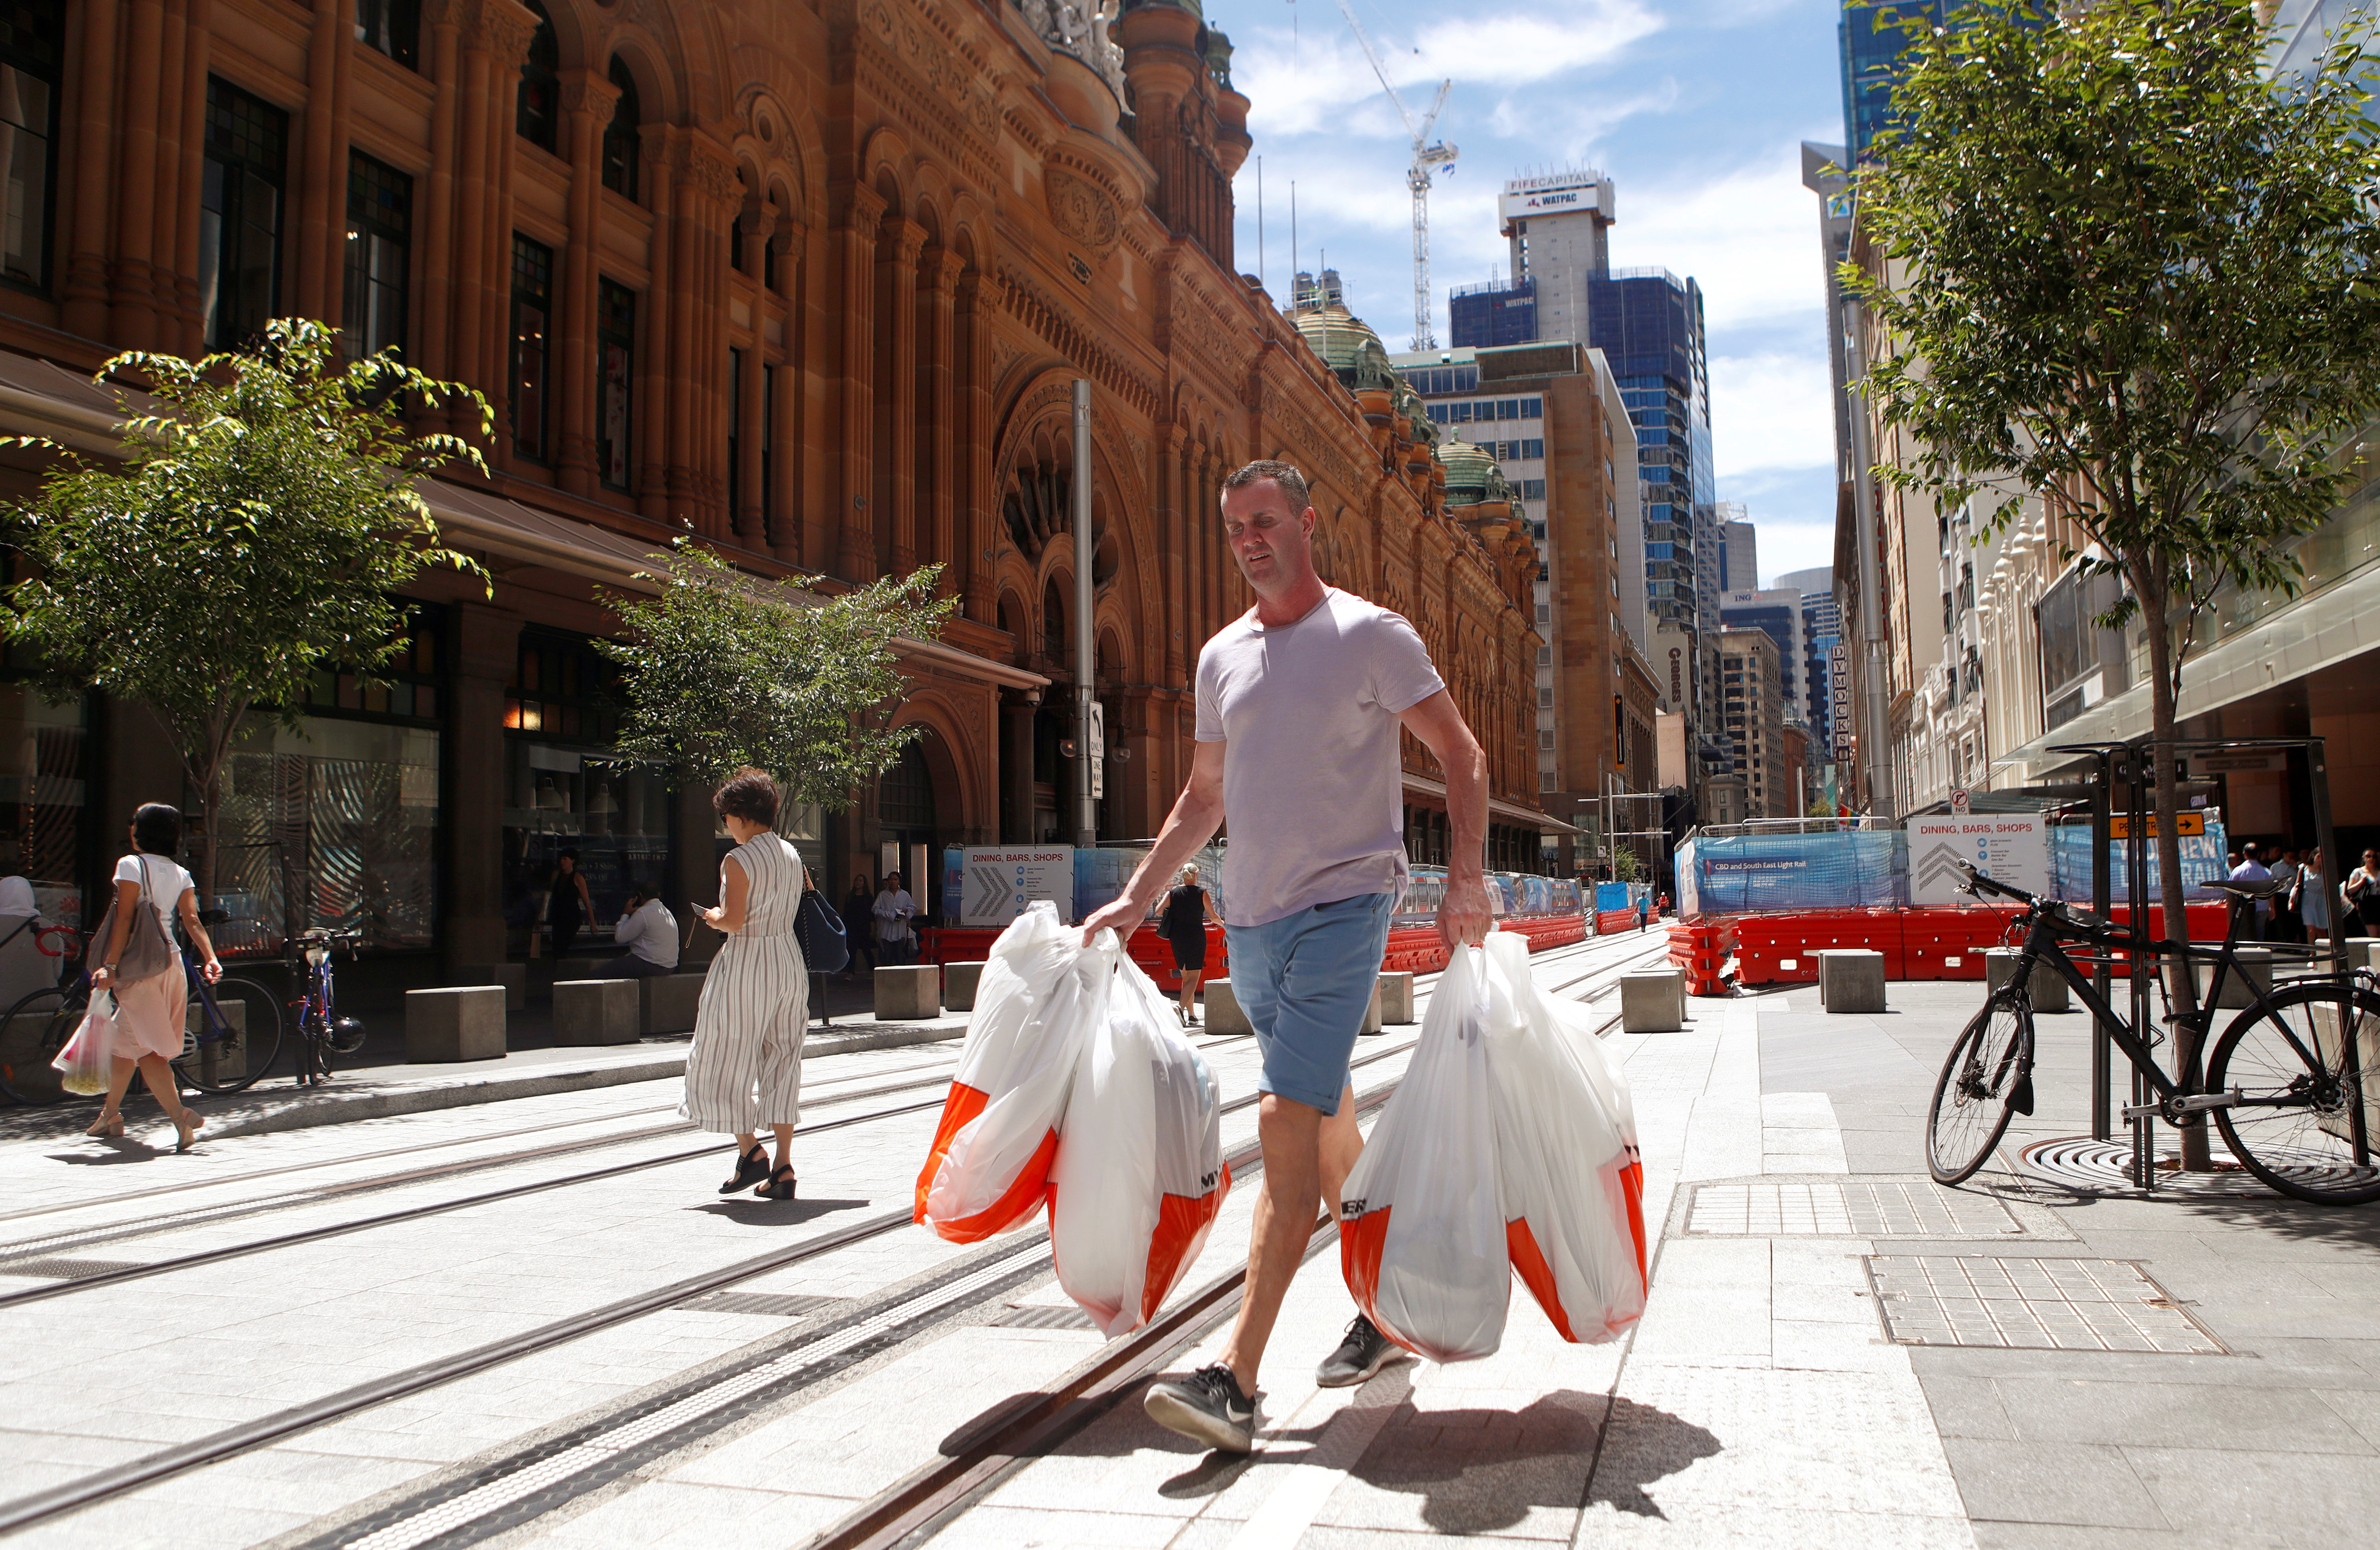 A man carries several shopping bags as he walks along George Street in Sydney